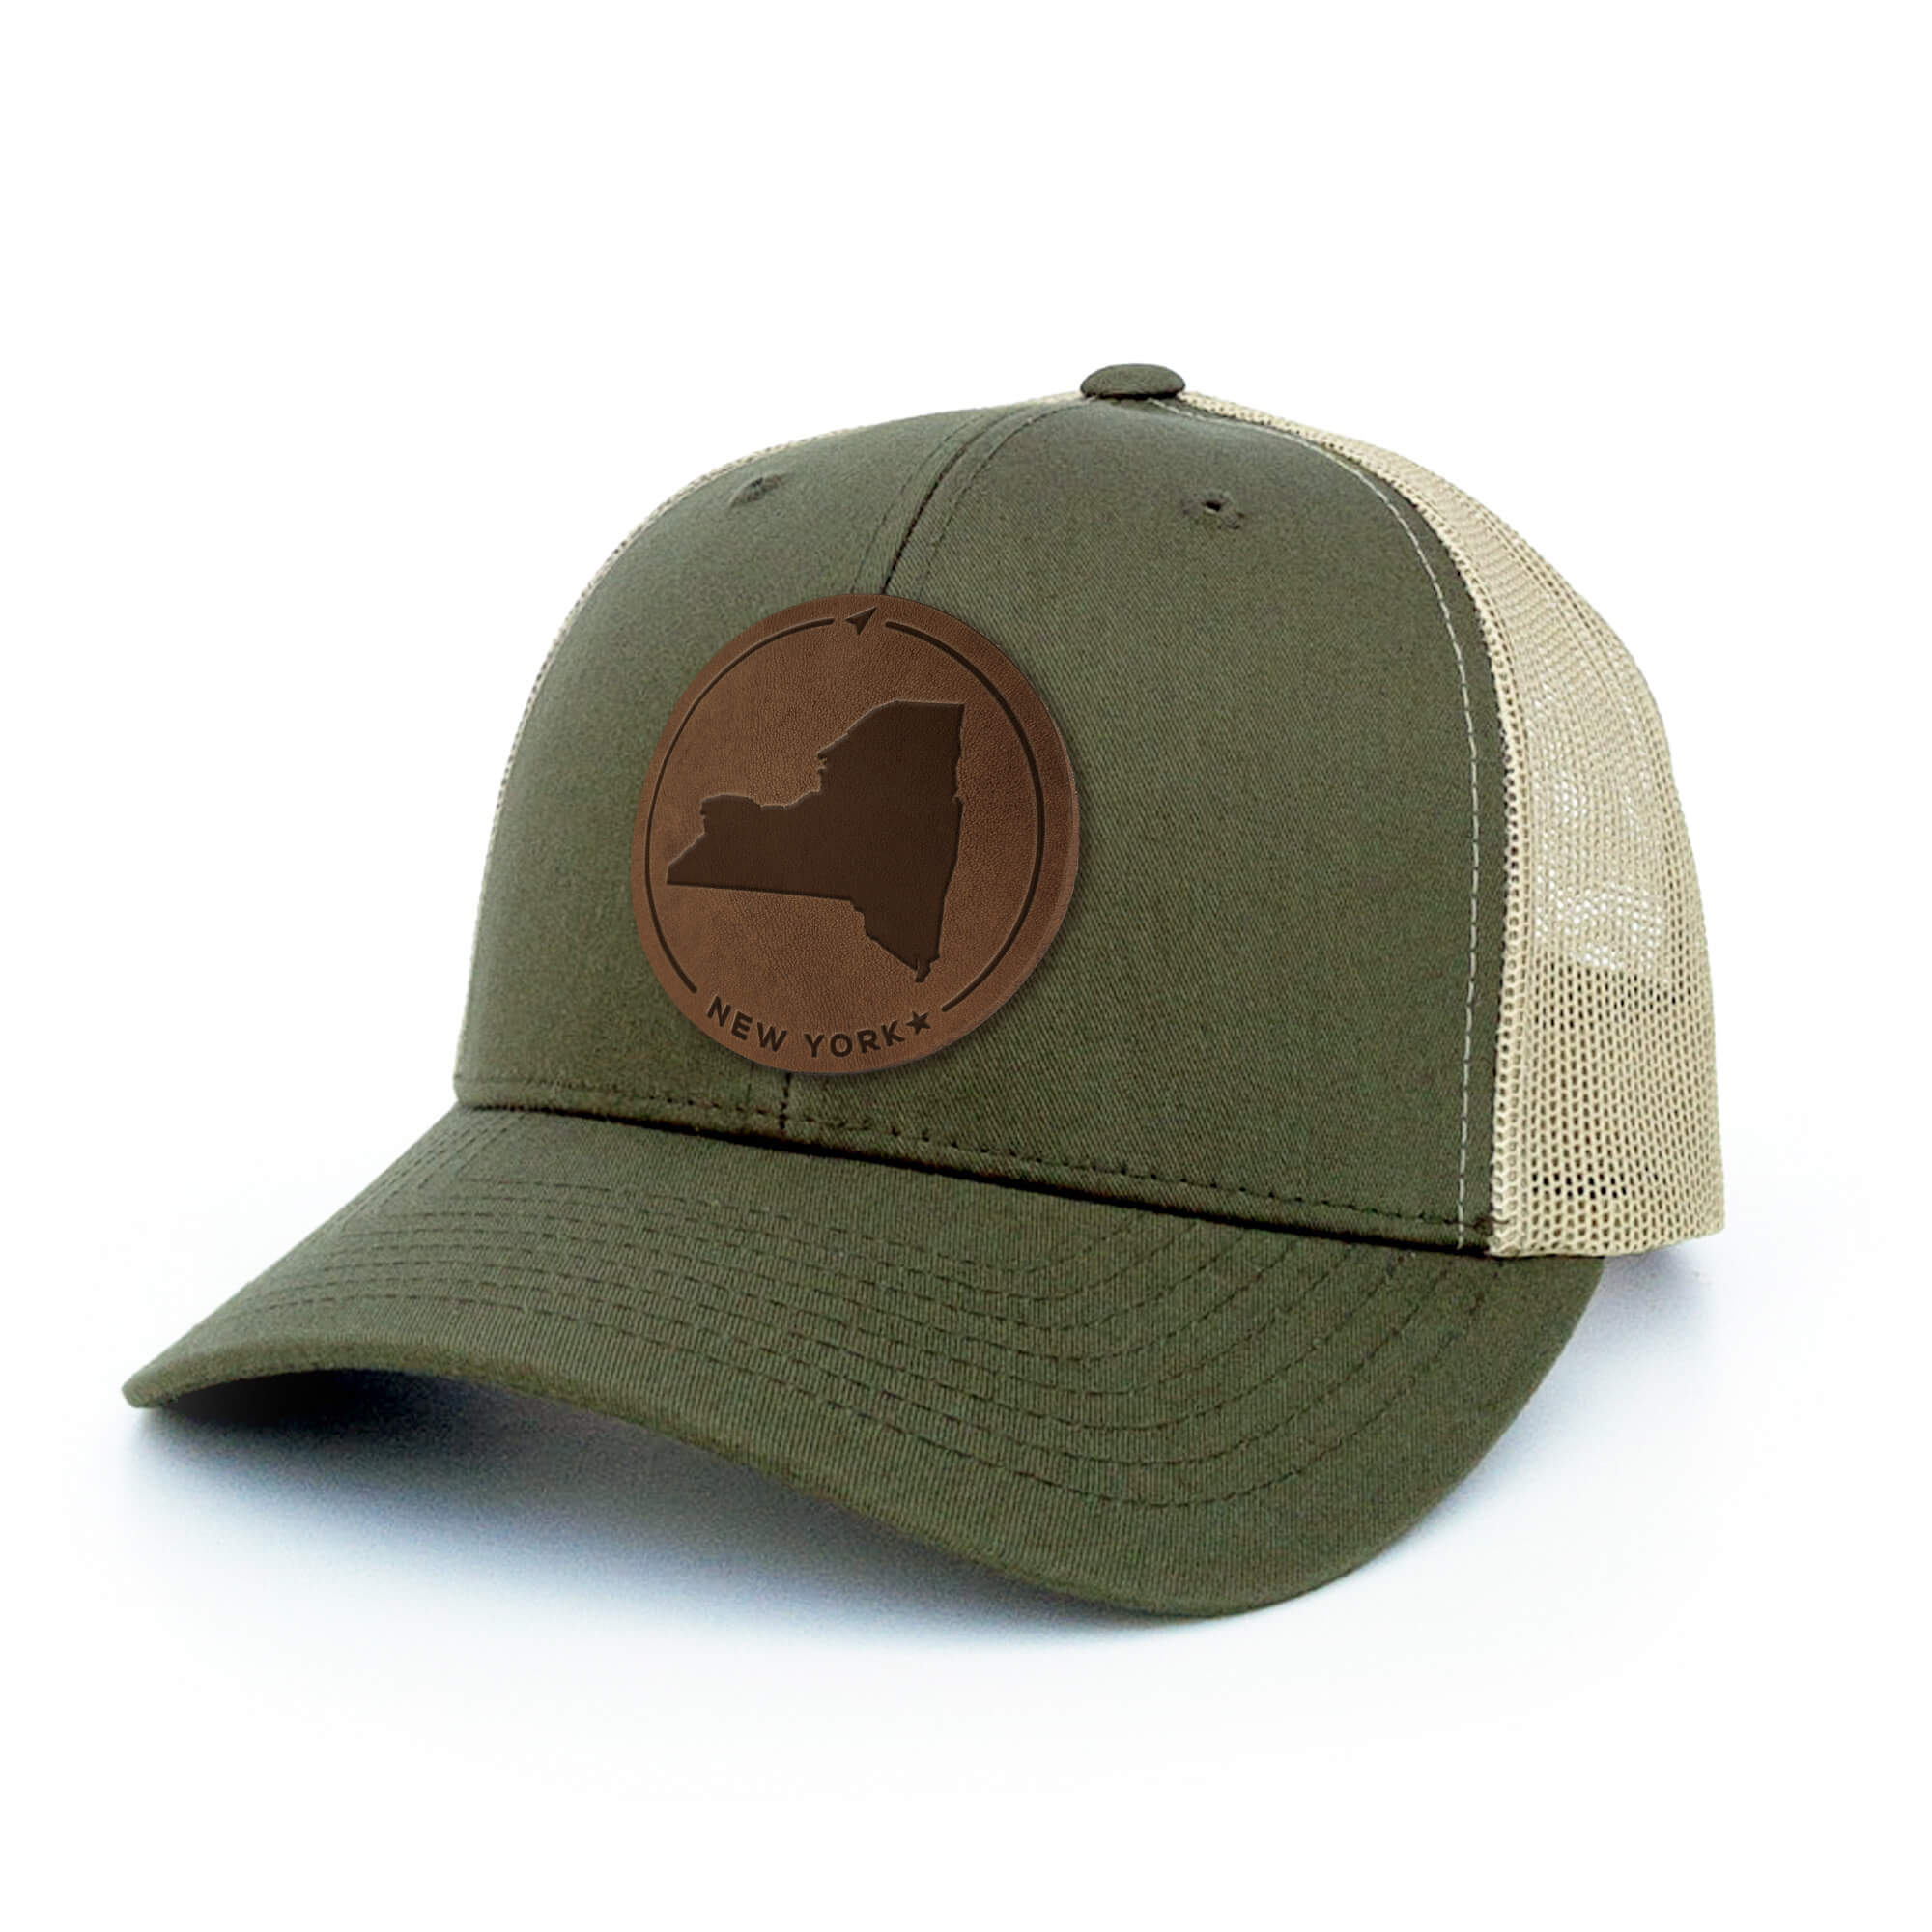 Moss Green and khaki trucker hat with full-grain leather patch of New York | BLACK-003-006, CHARC-003-006, NAVY-003-006, HGREY-003-006, MOSS-003-006, BROWN-003-006